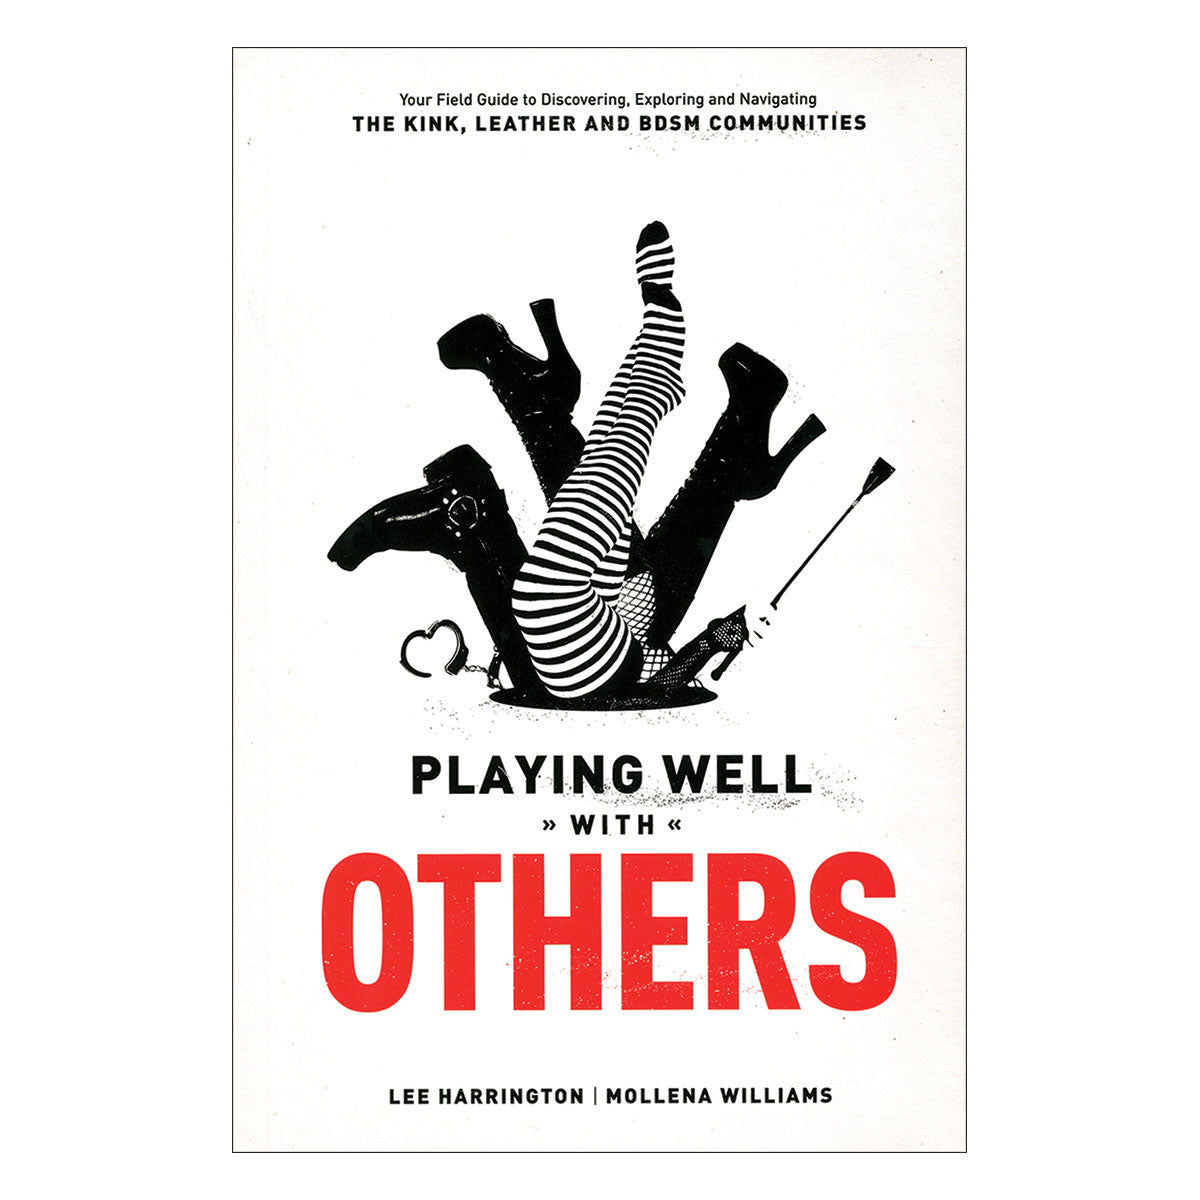 Playing Well With Others - Your Field Guide to Discovering, Exploring and Navigating the Kink, Leather and BDSM Communities